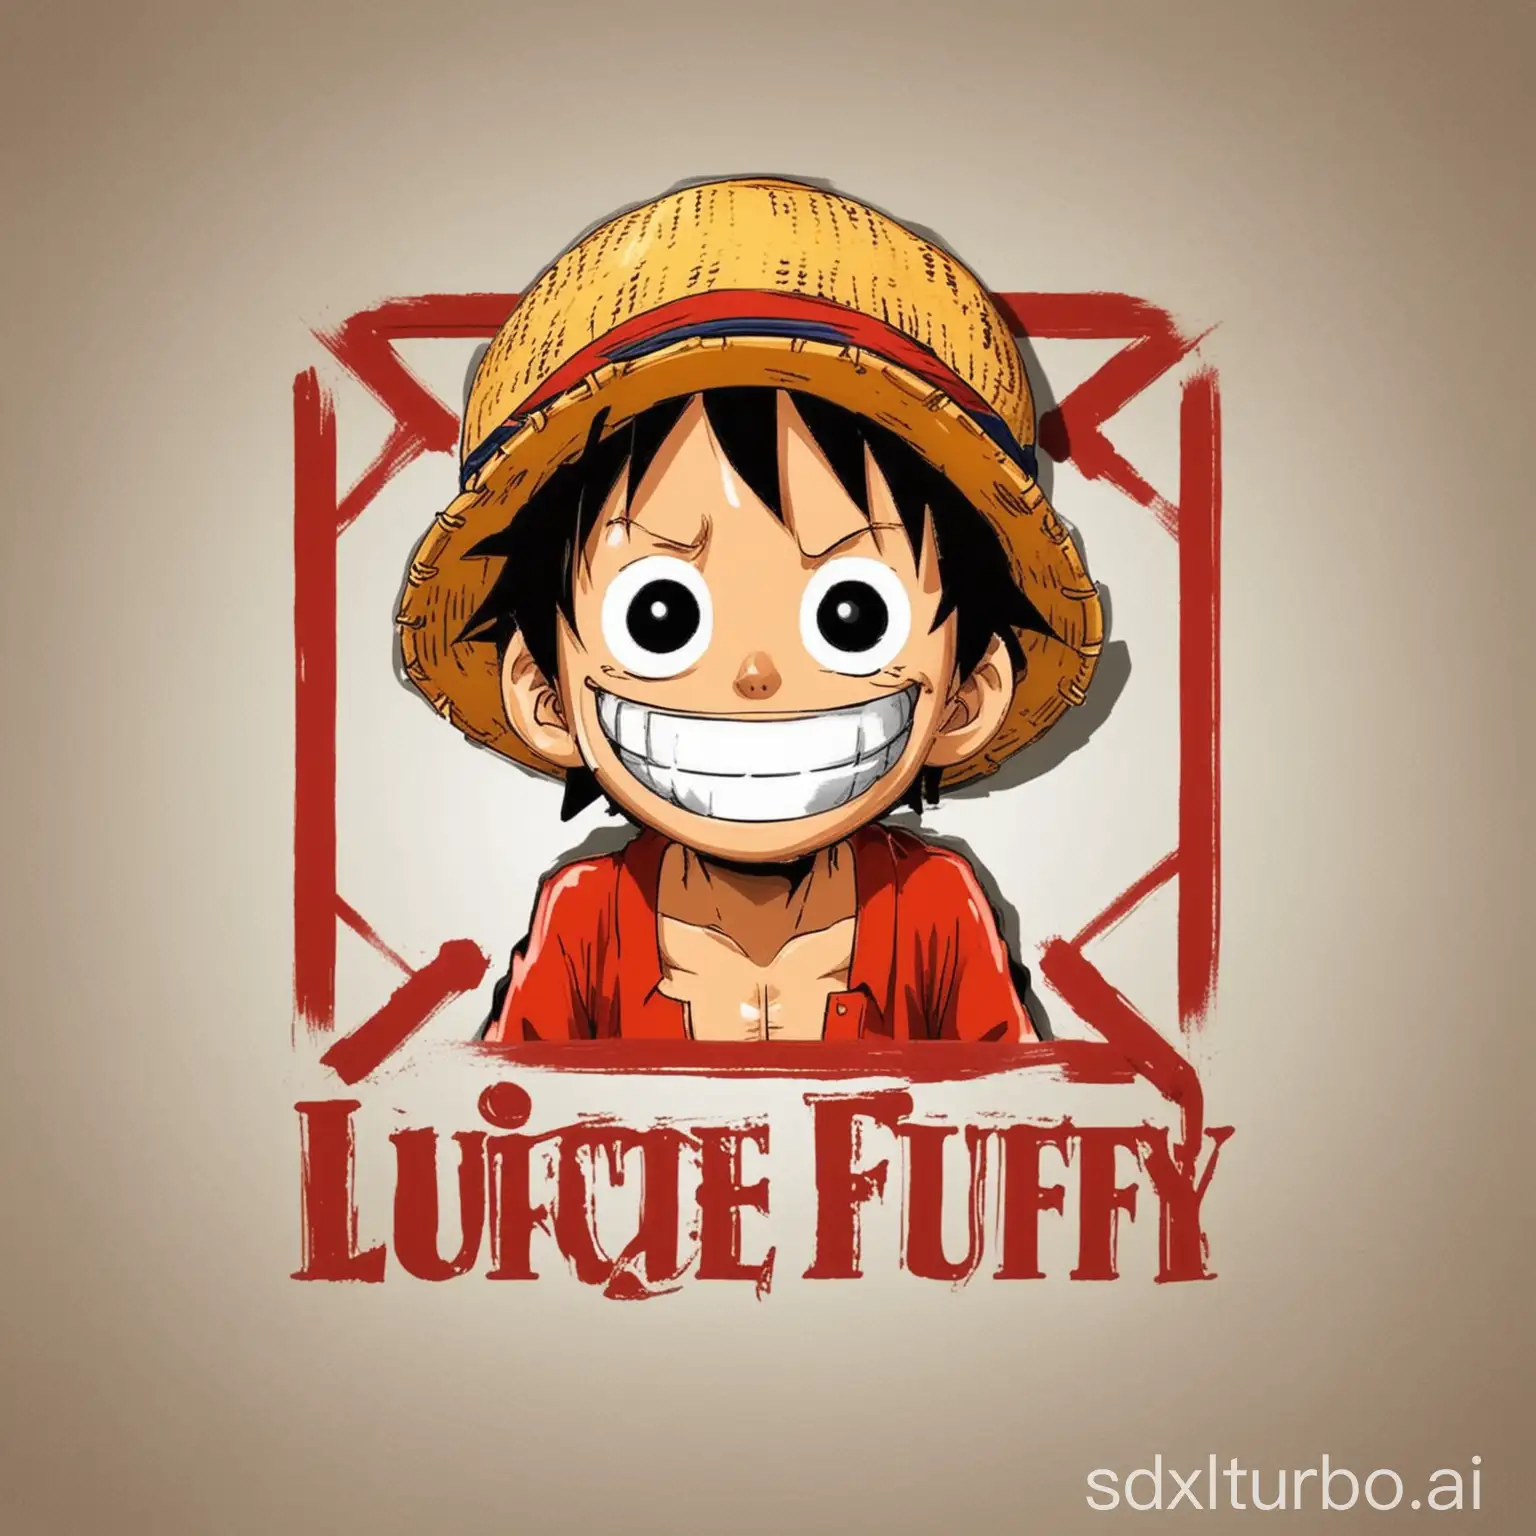 Luffy Youtube video downloader
a image where anime charcter monkey D. luffy stand on youtube logo for download the video
